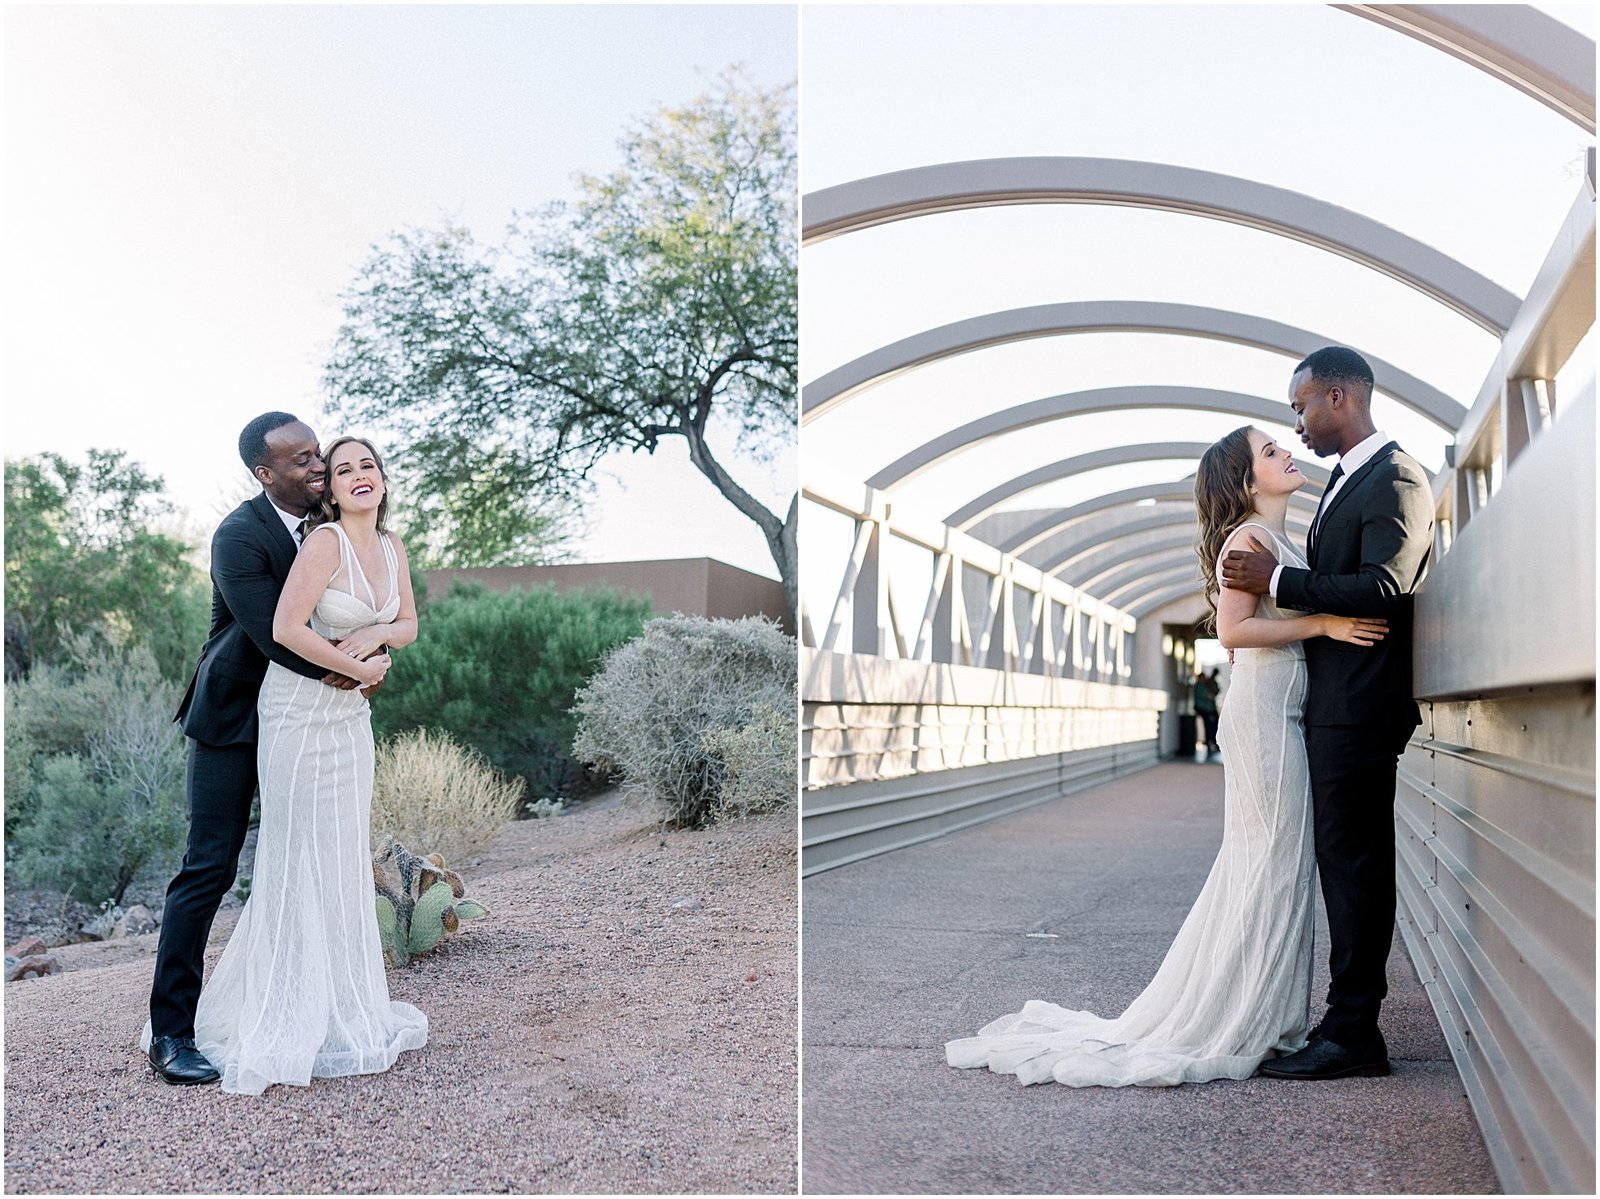 The Bride and Groom captured by Staci Addison Photography